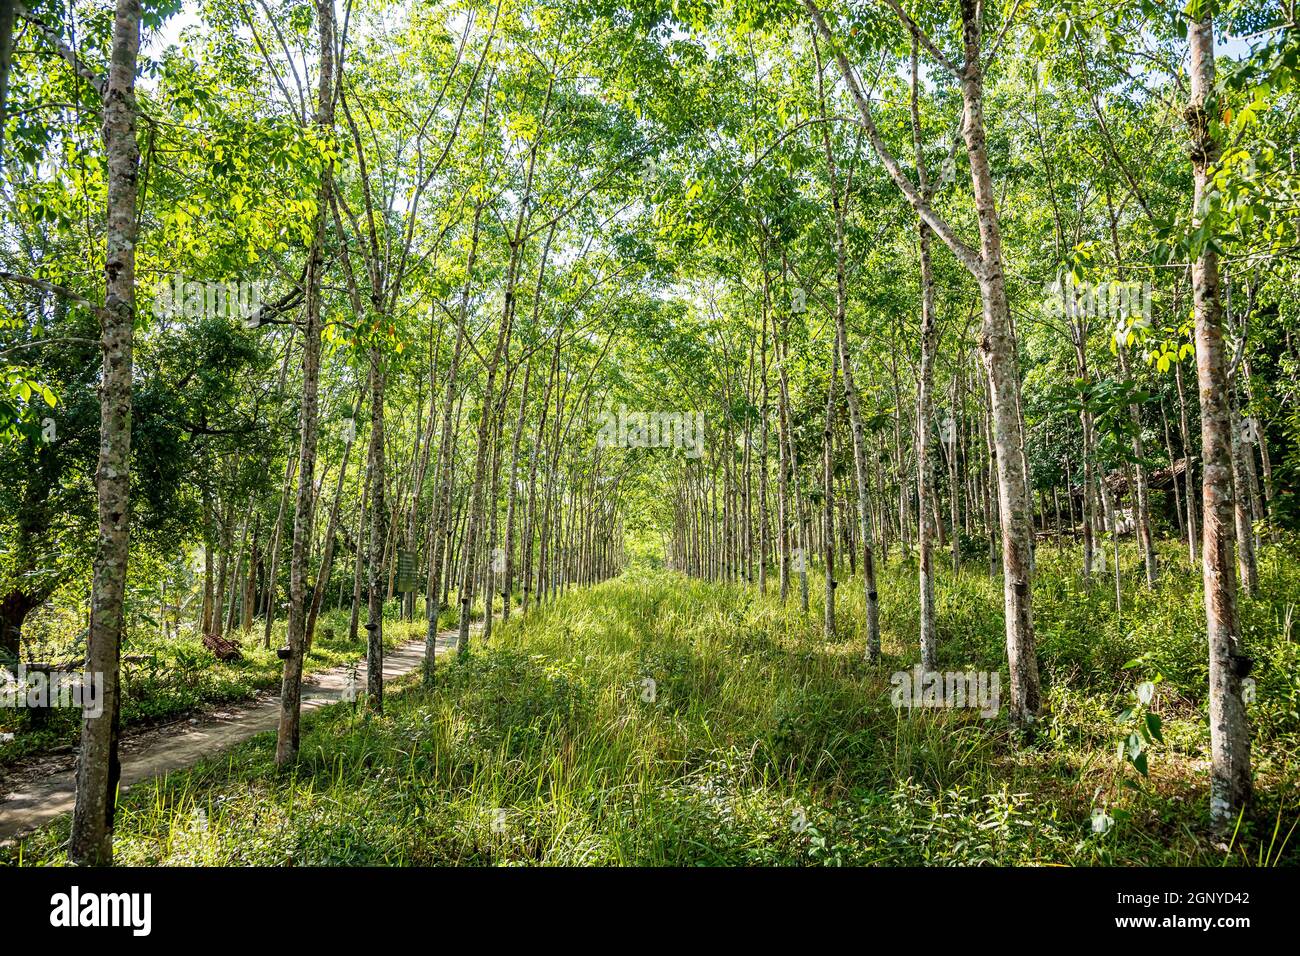 Rubber tree plantation with rows of cultivated trees, South of Thailand. Stock Photo